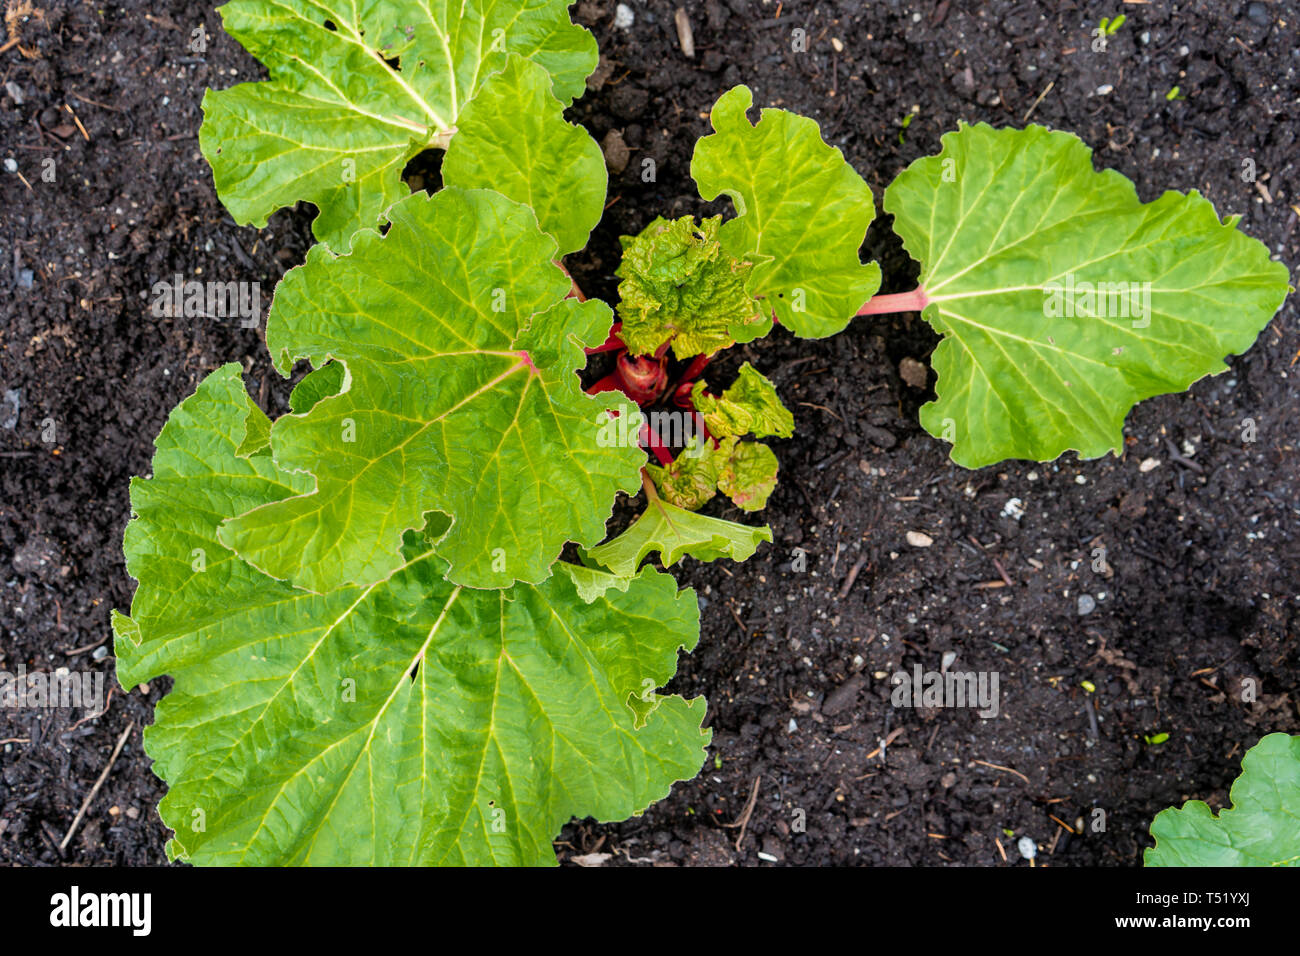 Red rhubarb plant growing in compost soil, inearly spring, showing big leaves containing oxalic acid. Red stalks showing. Perennial edible vegetable i Stock Photo